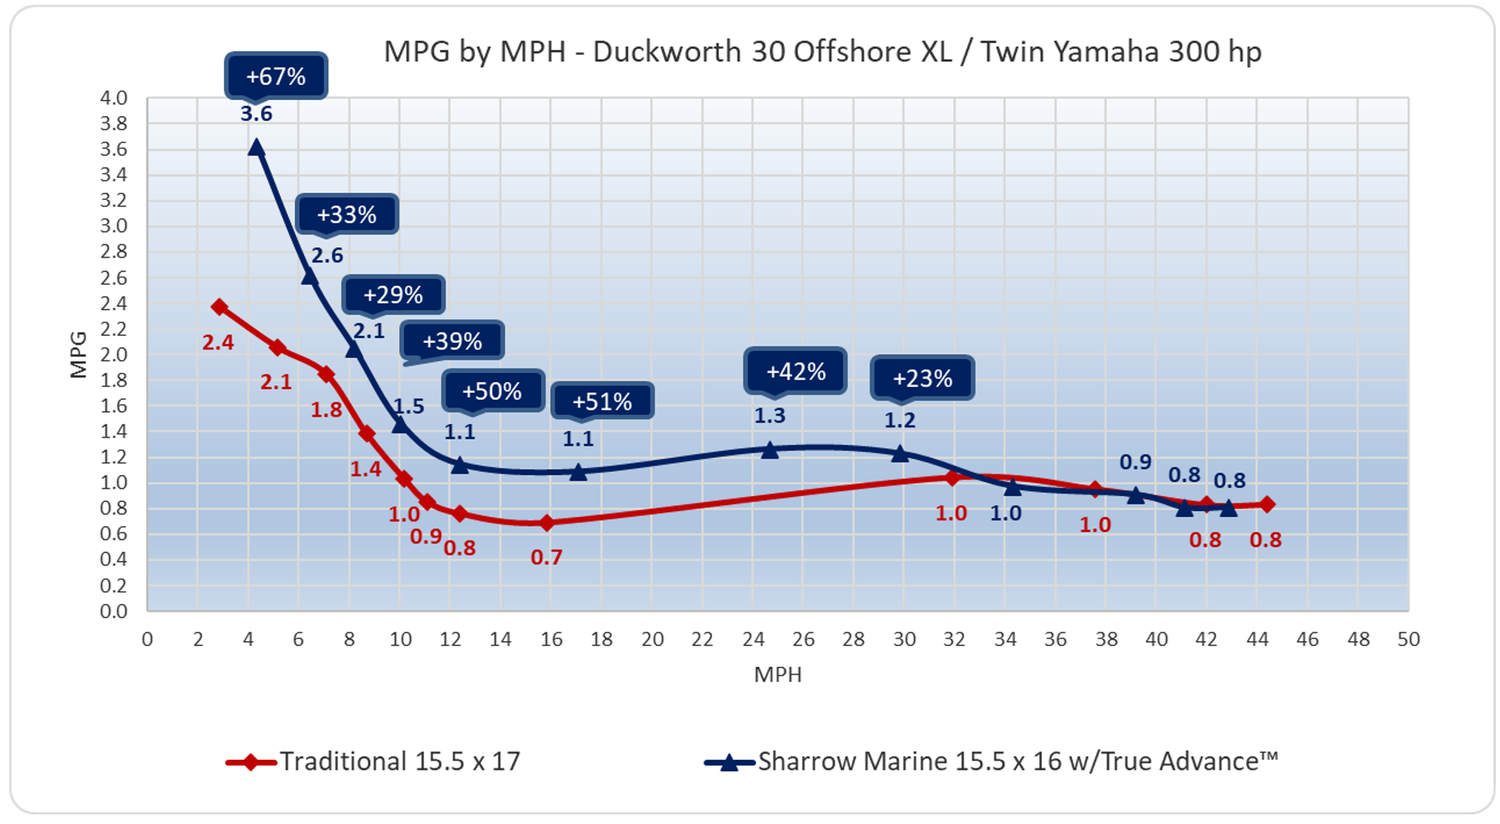 MPG by MPH - Duckworth 30 Offshore XL / Twin Yamaha 300 hp